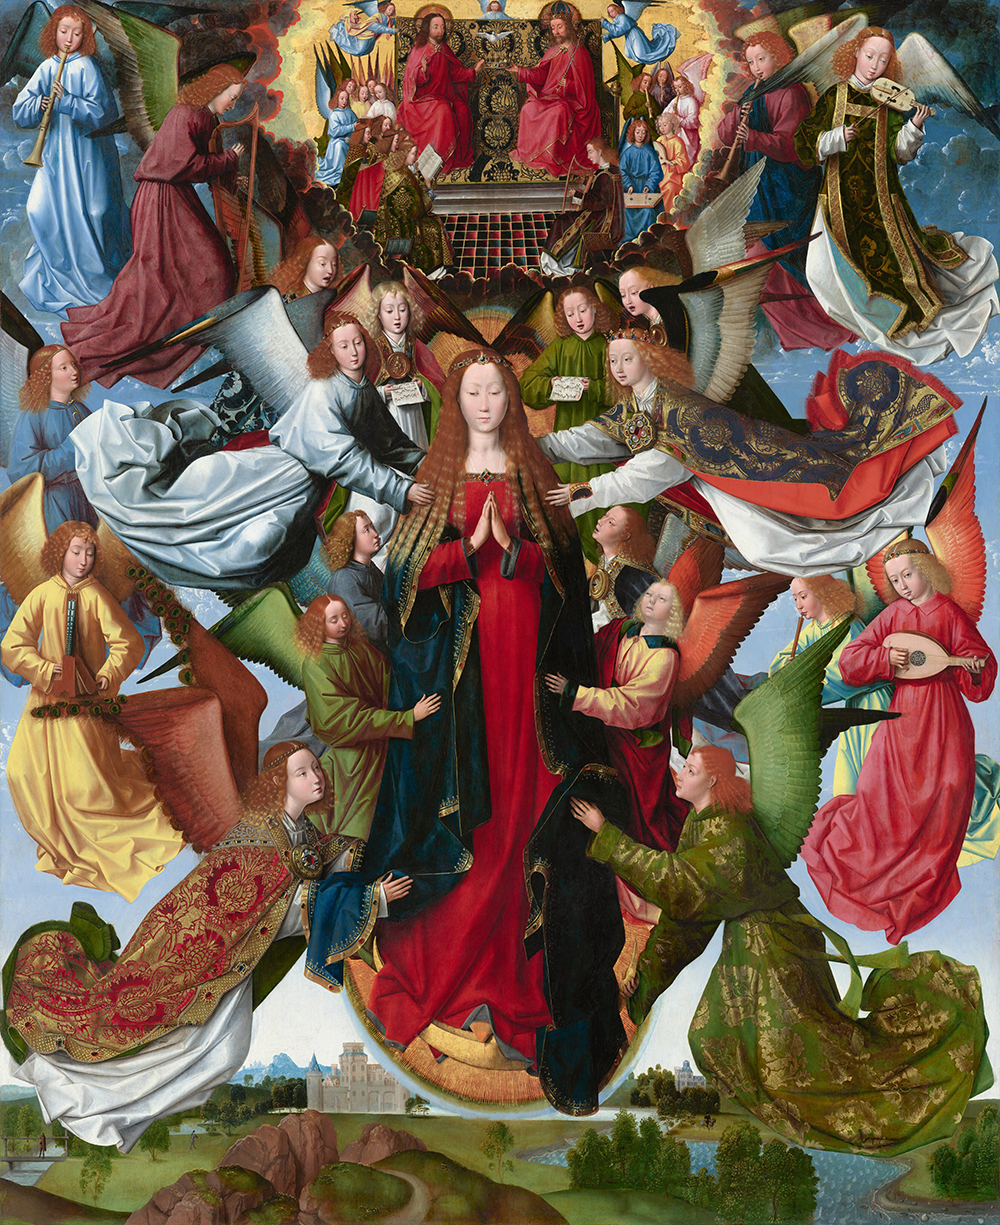 A woman wearing long robes and standing on an upturned, gold crescent moon is surrounded by twenty angels who lift her up, sing, or play musical instruments in this vertical painting.